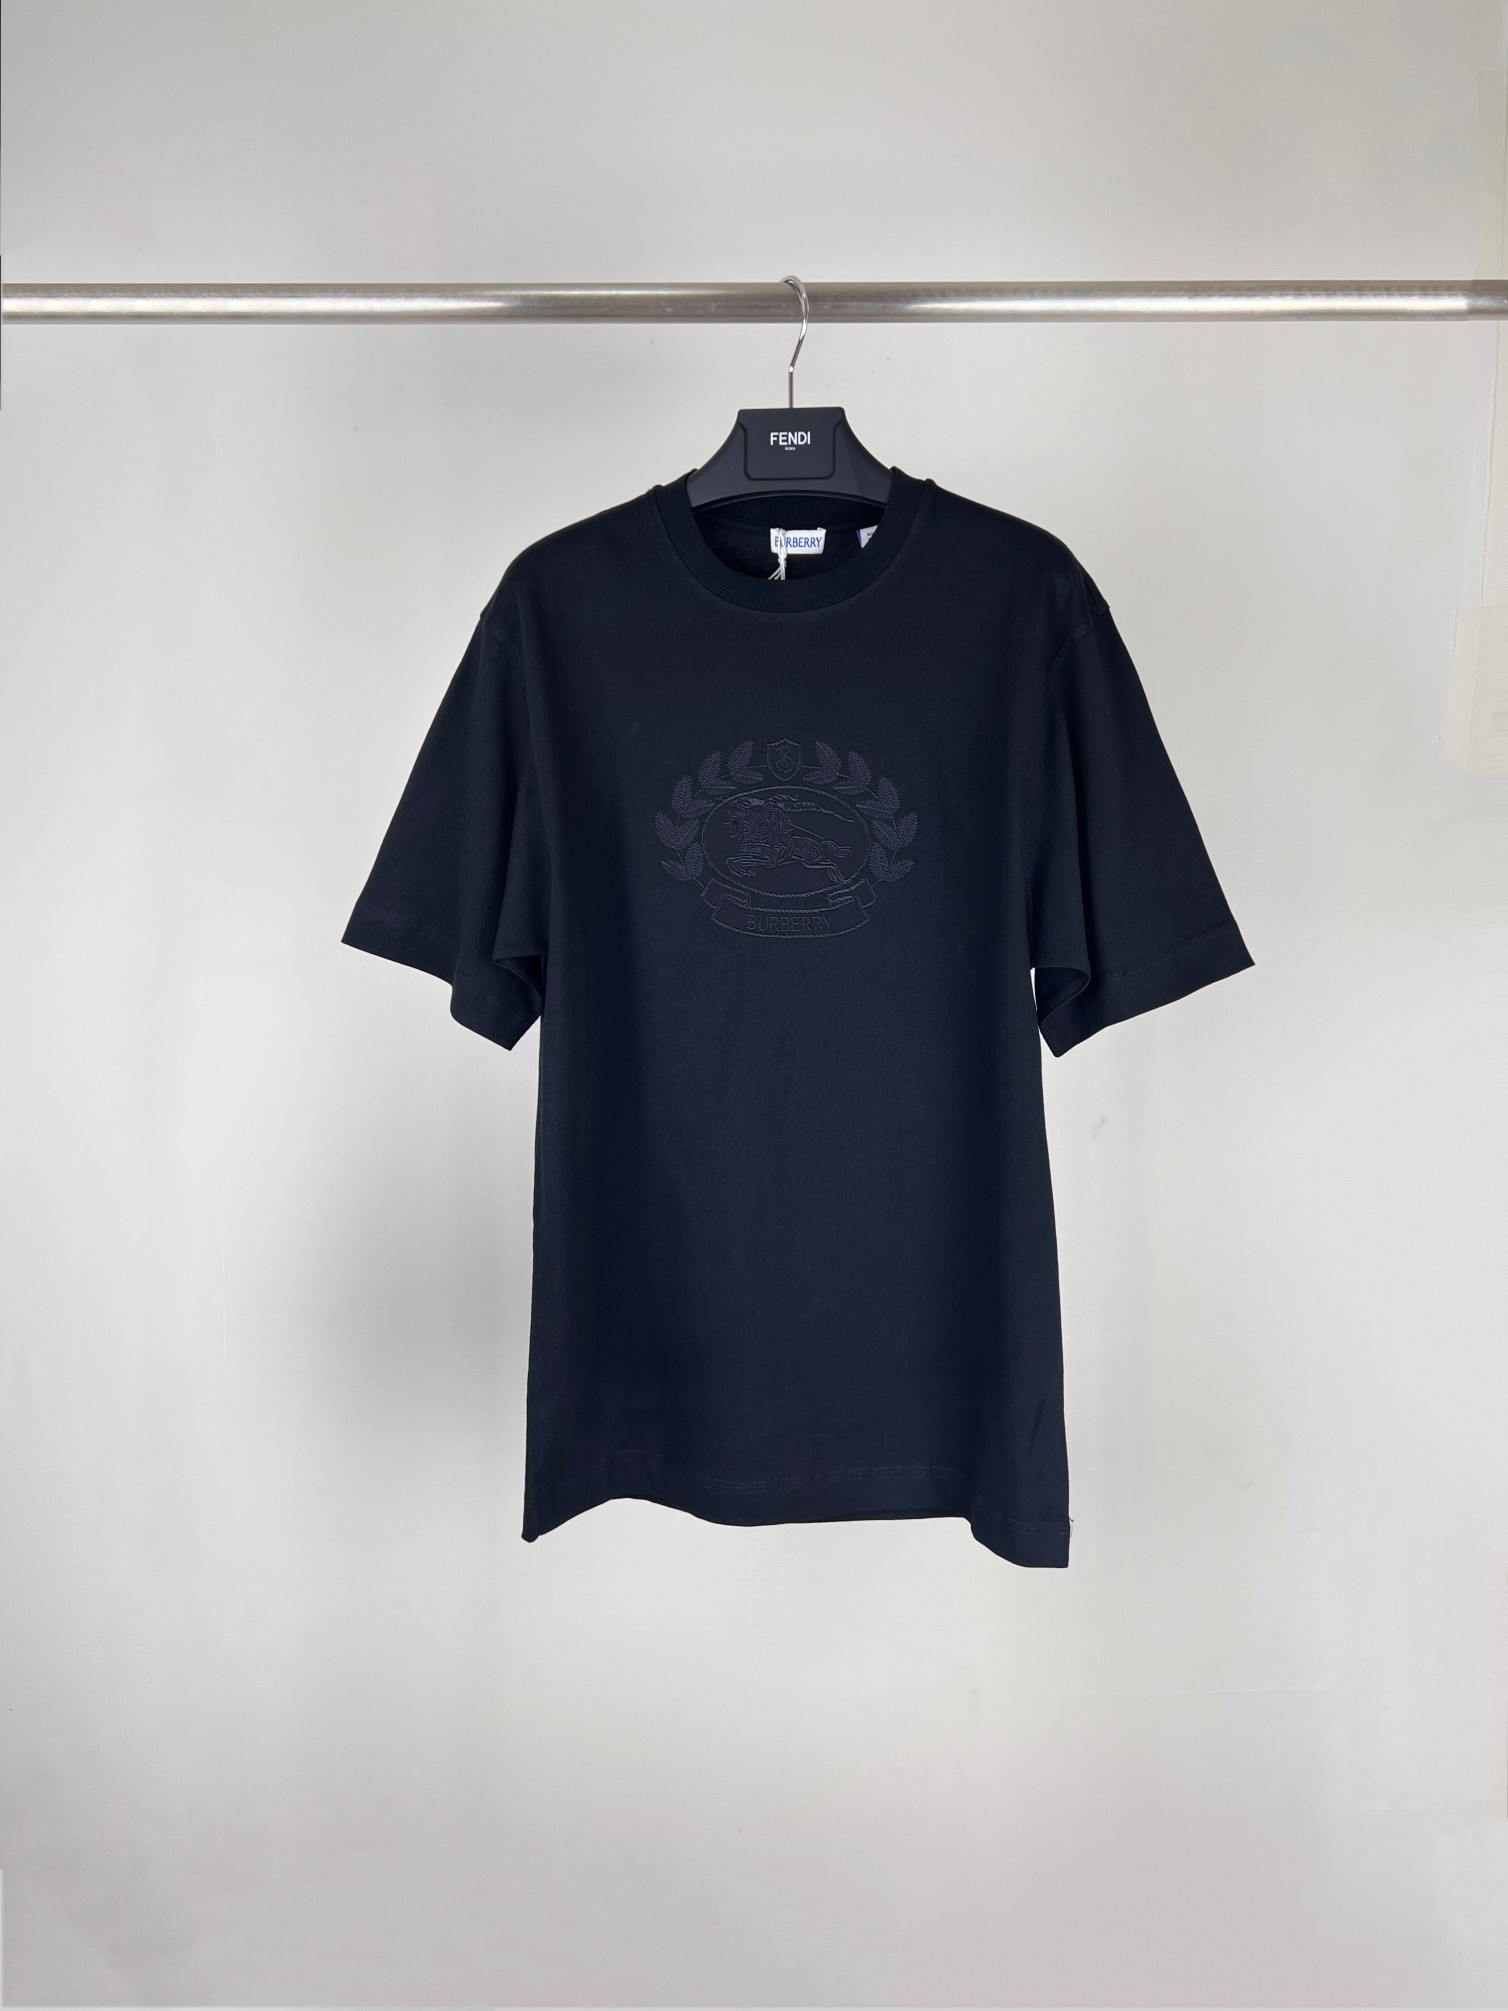 Burberry Clothing T-Shirt Exclusive Cheap
 Embroidery Short Sleeve